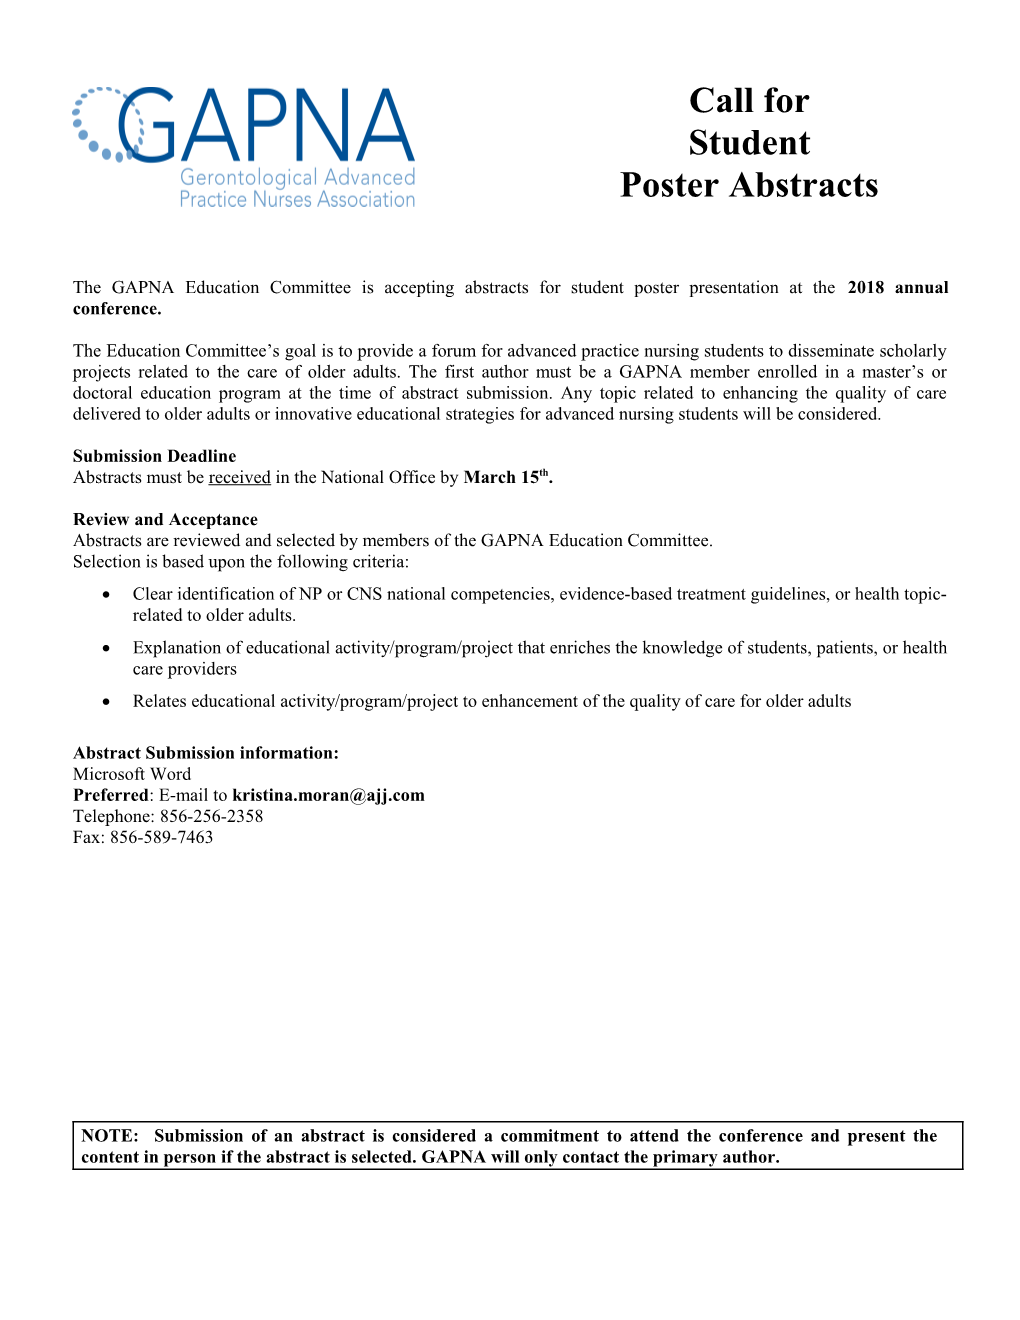 The GAPNA Education Committee Is Accepting Abstracts for Student Poster Presentation At